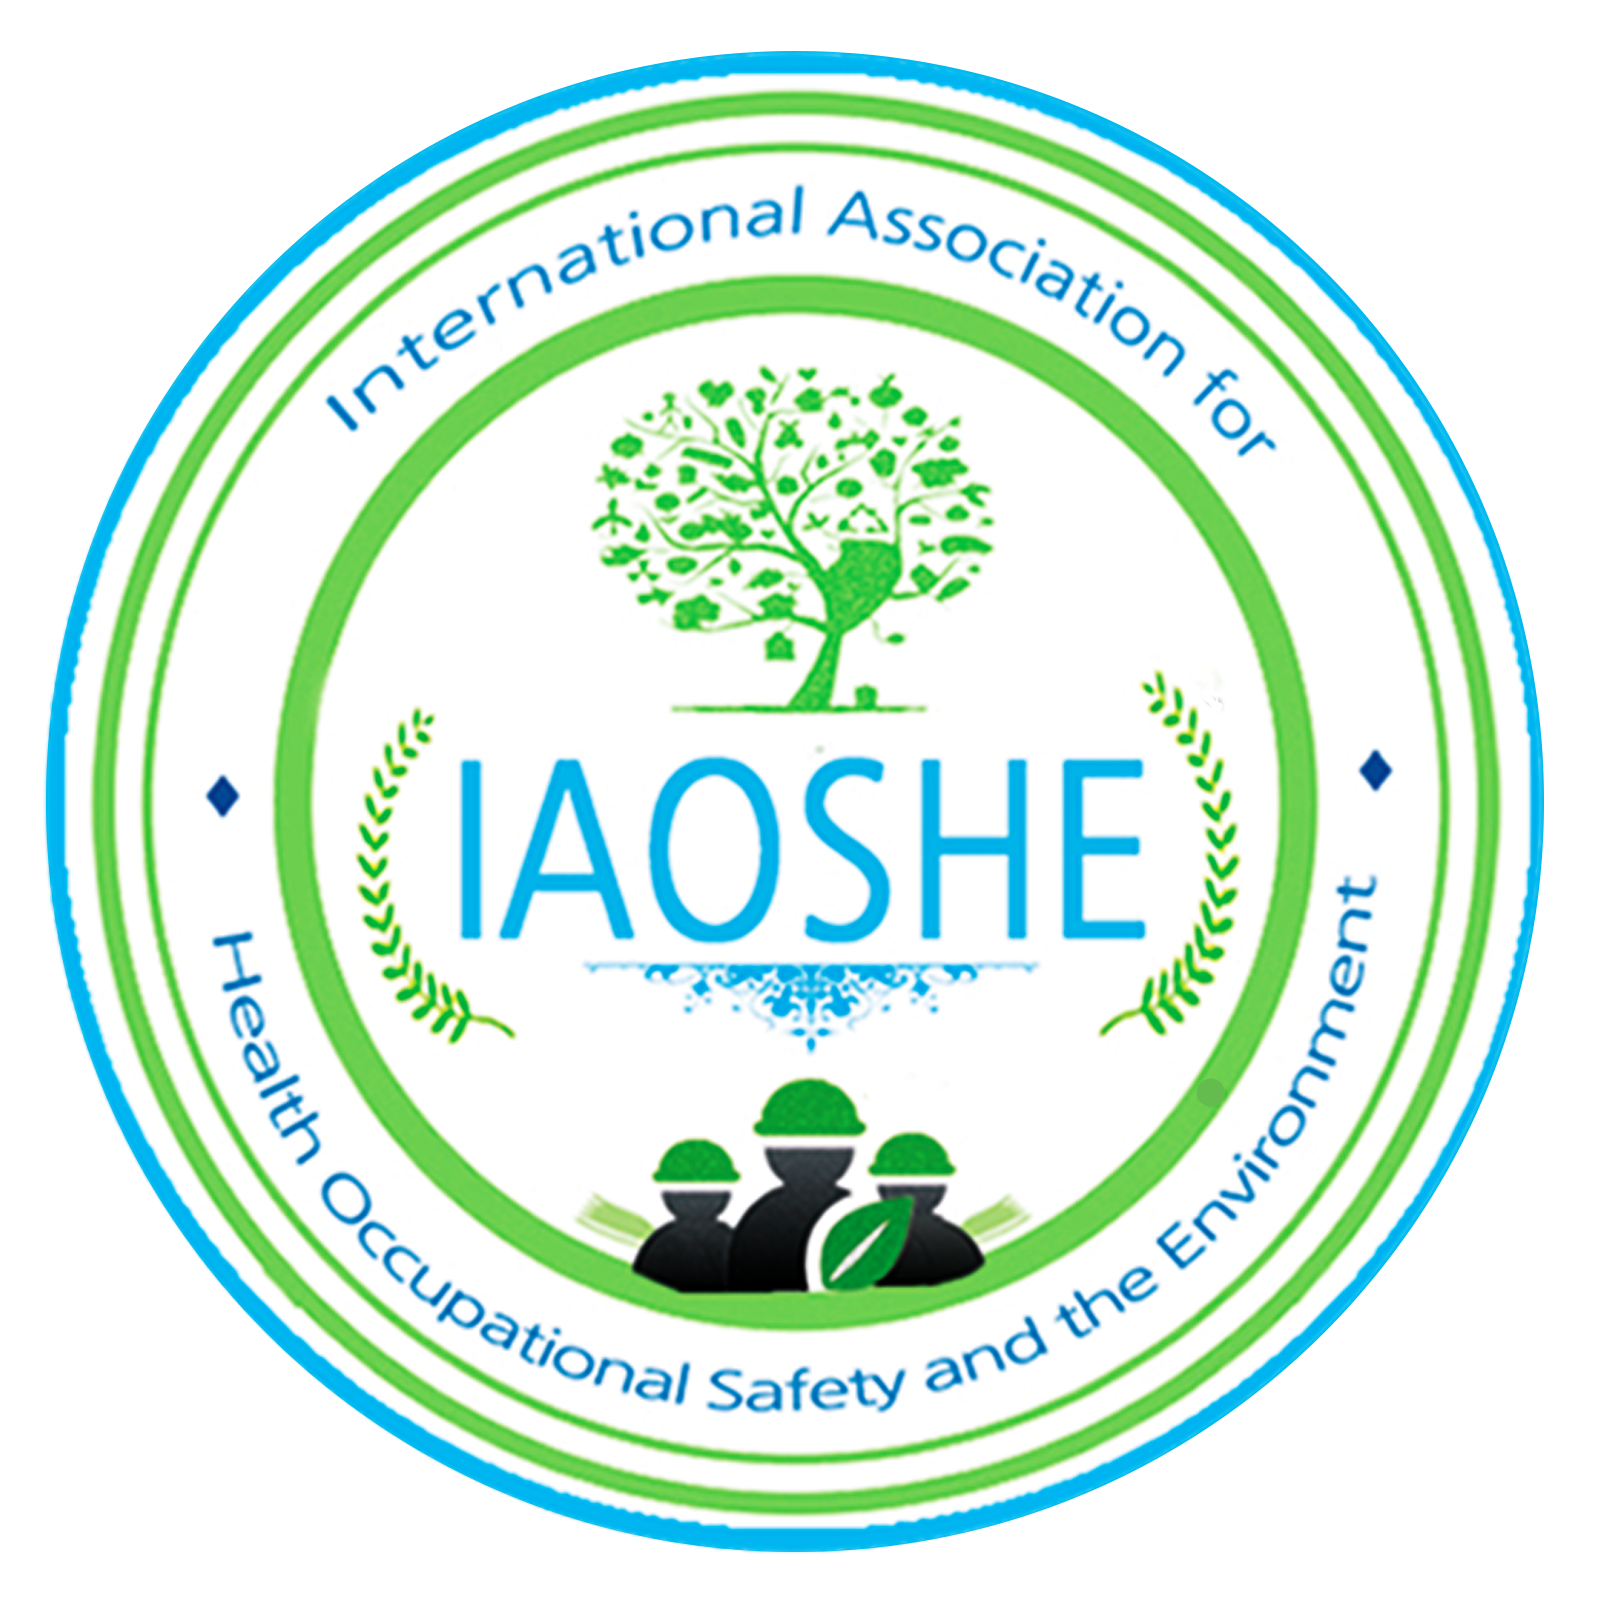 The International Association for Health and Occupational Safety and the Environment